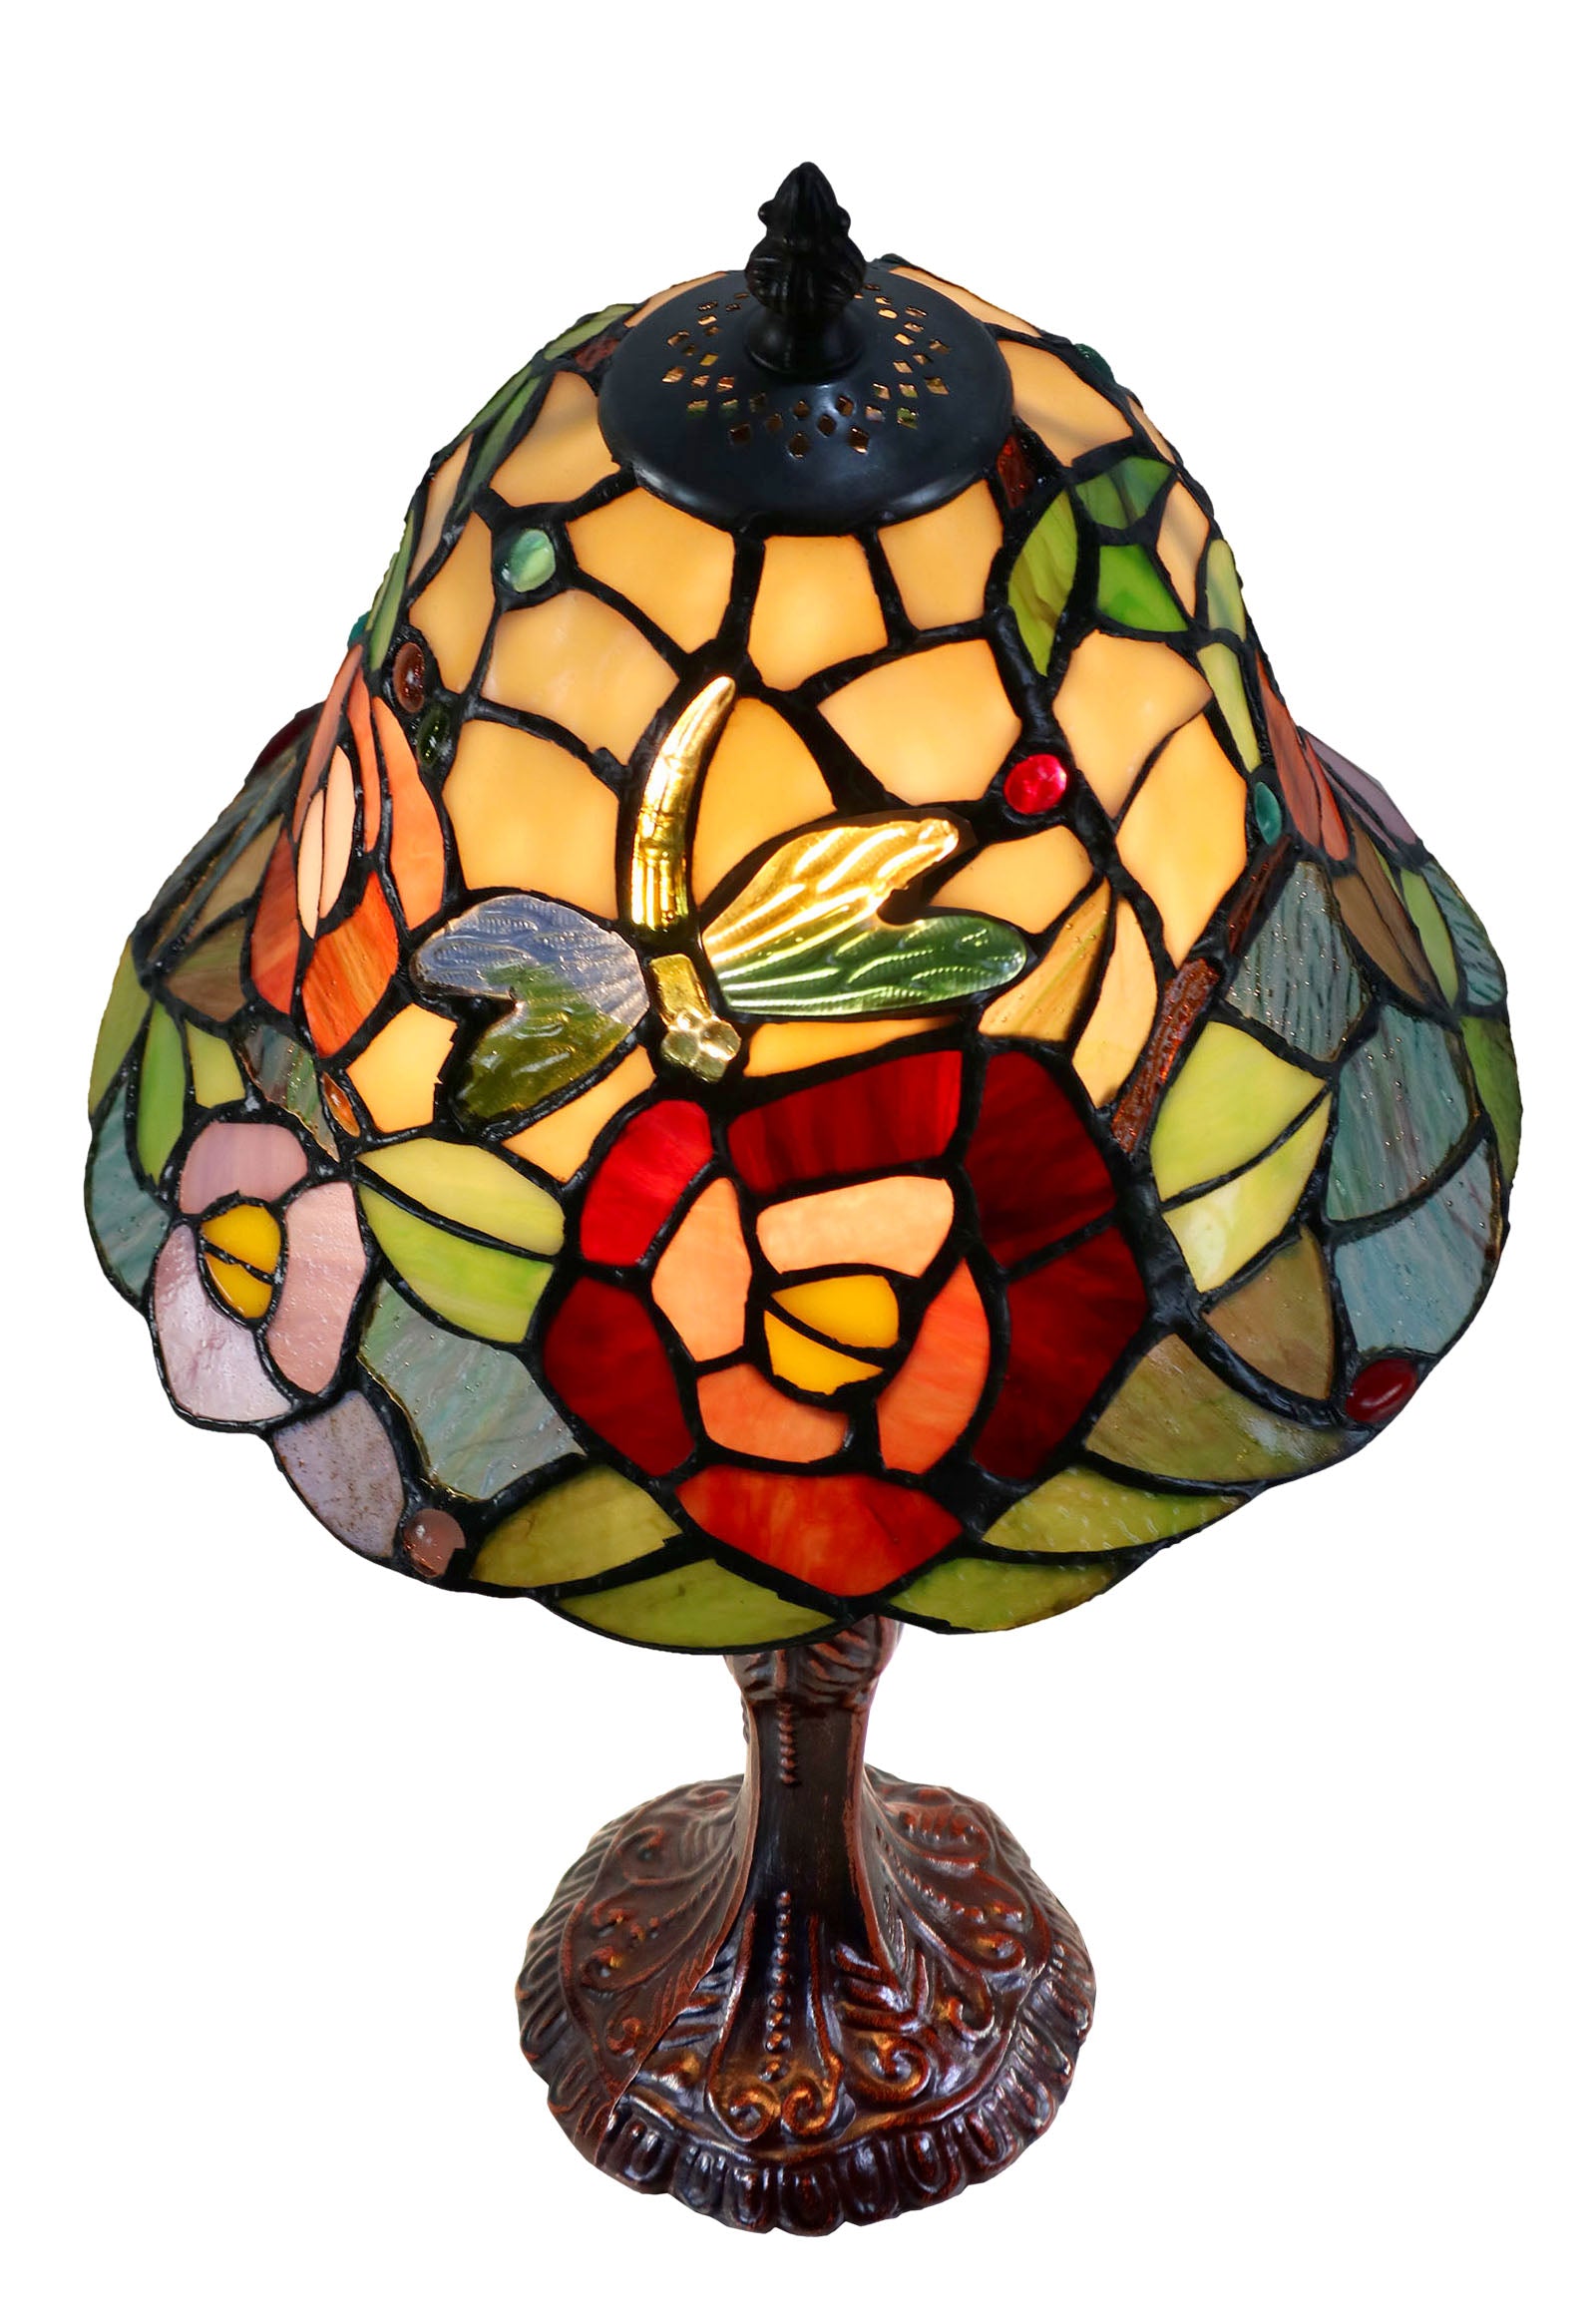 10" Rosita Tiffany Style Stained Glass Table Lamp